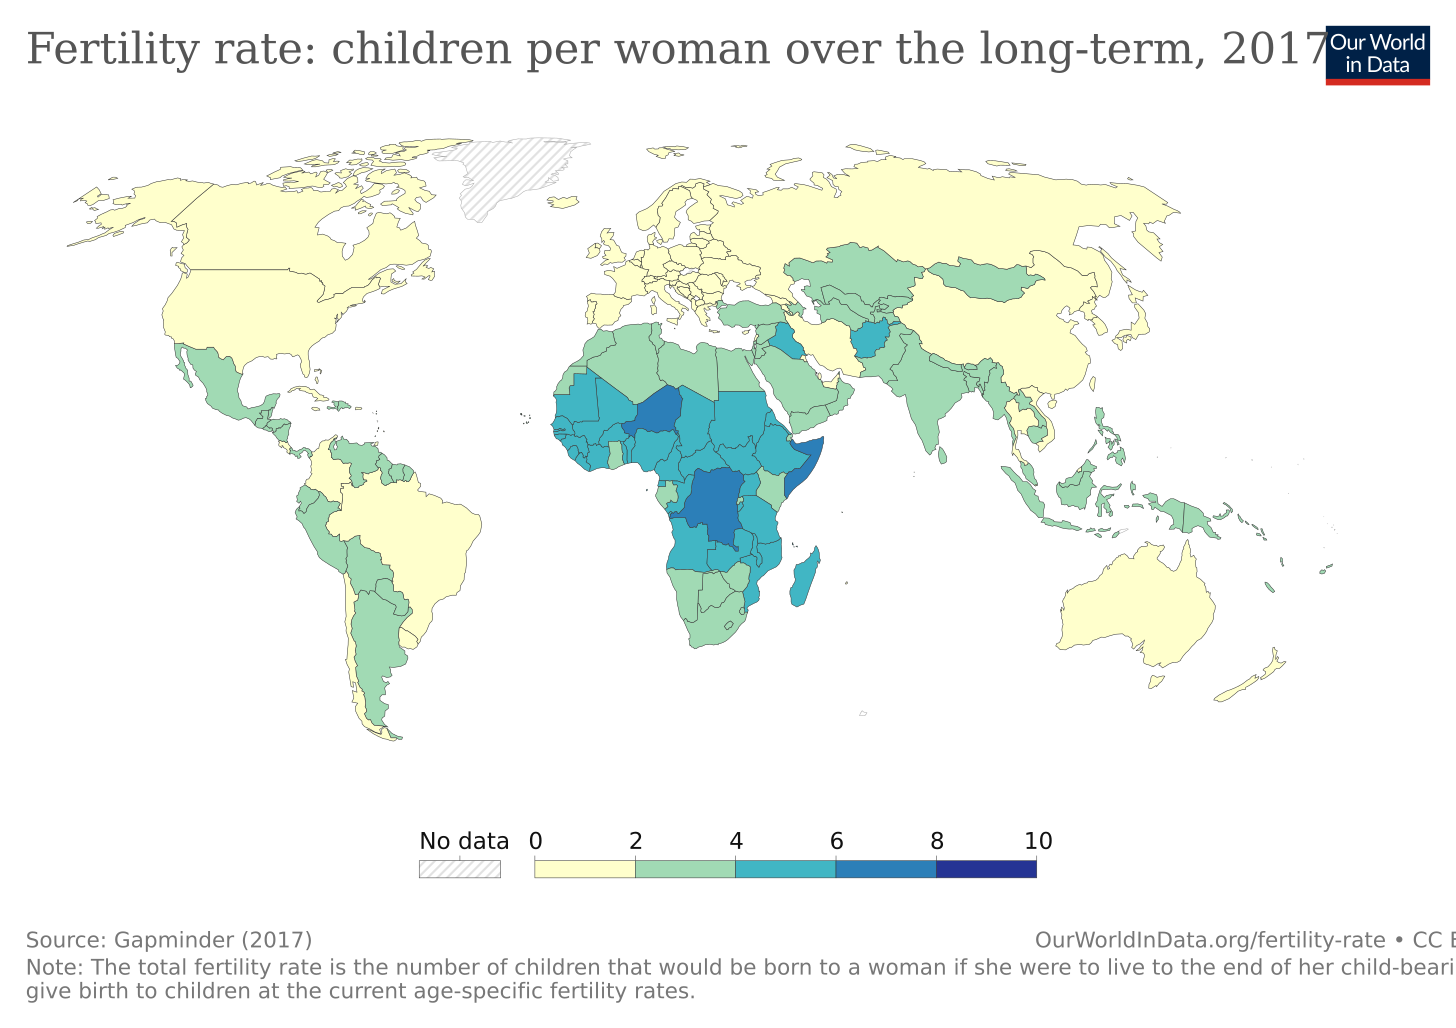 Fertility Rate - Our World in Data